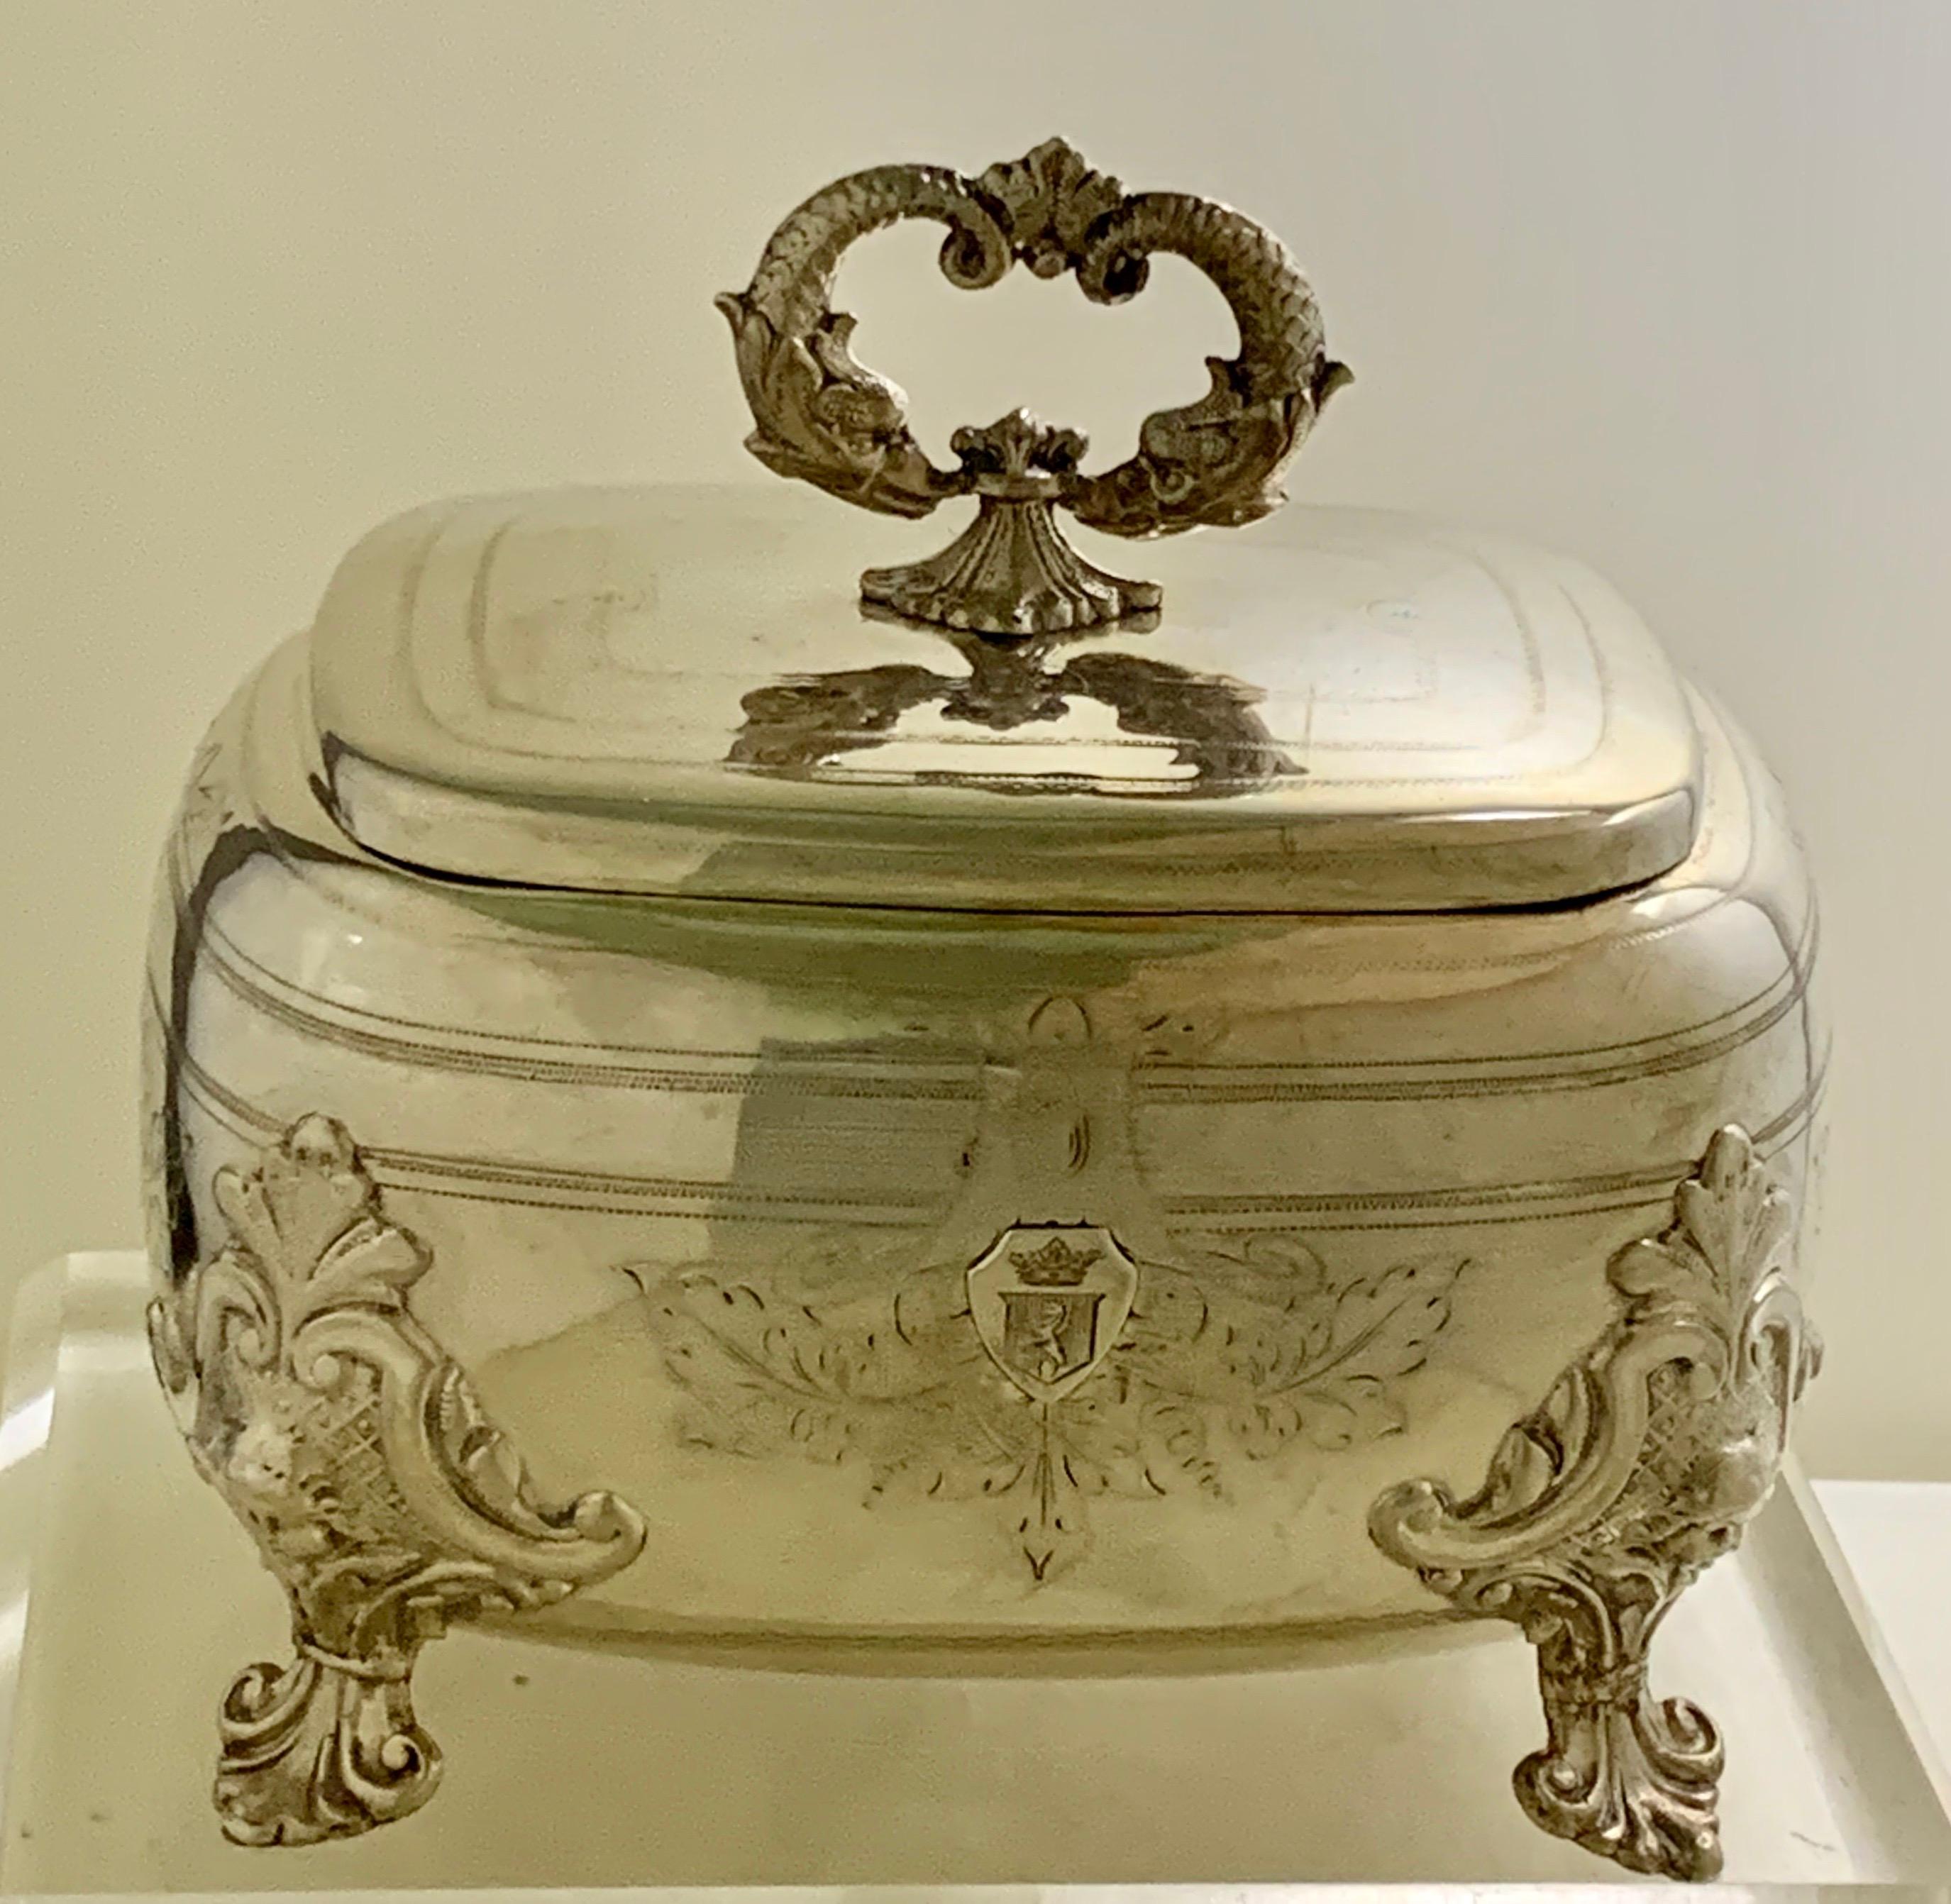 Ornate antique French sterling silver sugar casket, lidded sugar box,
A high quality piece with double fish finial, engraved decoration, ornate feet
with a coat of arms at the front.
Presented in very good condition and well cherished.